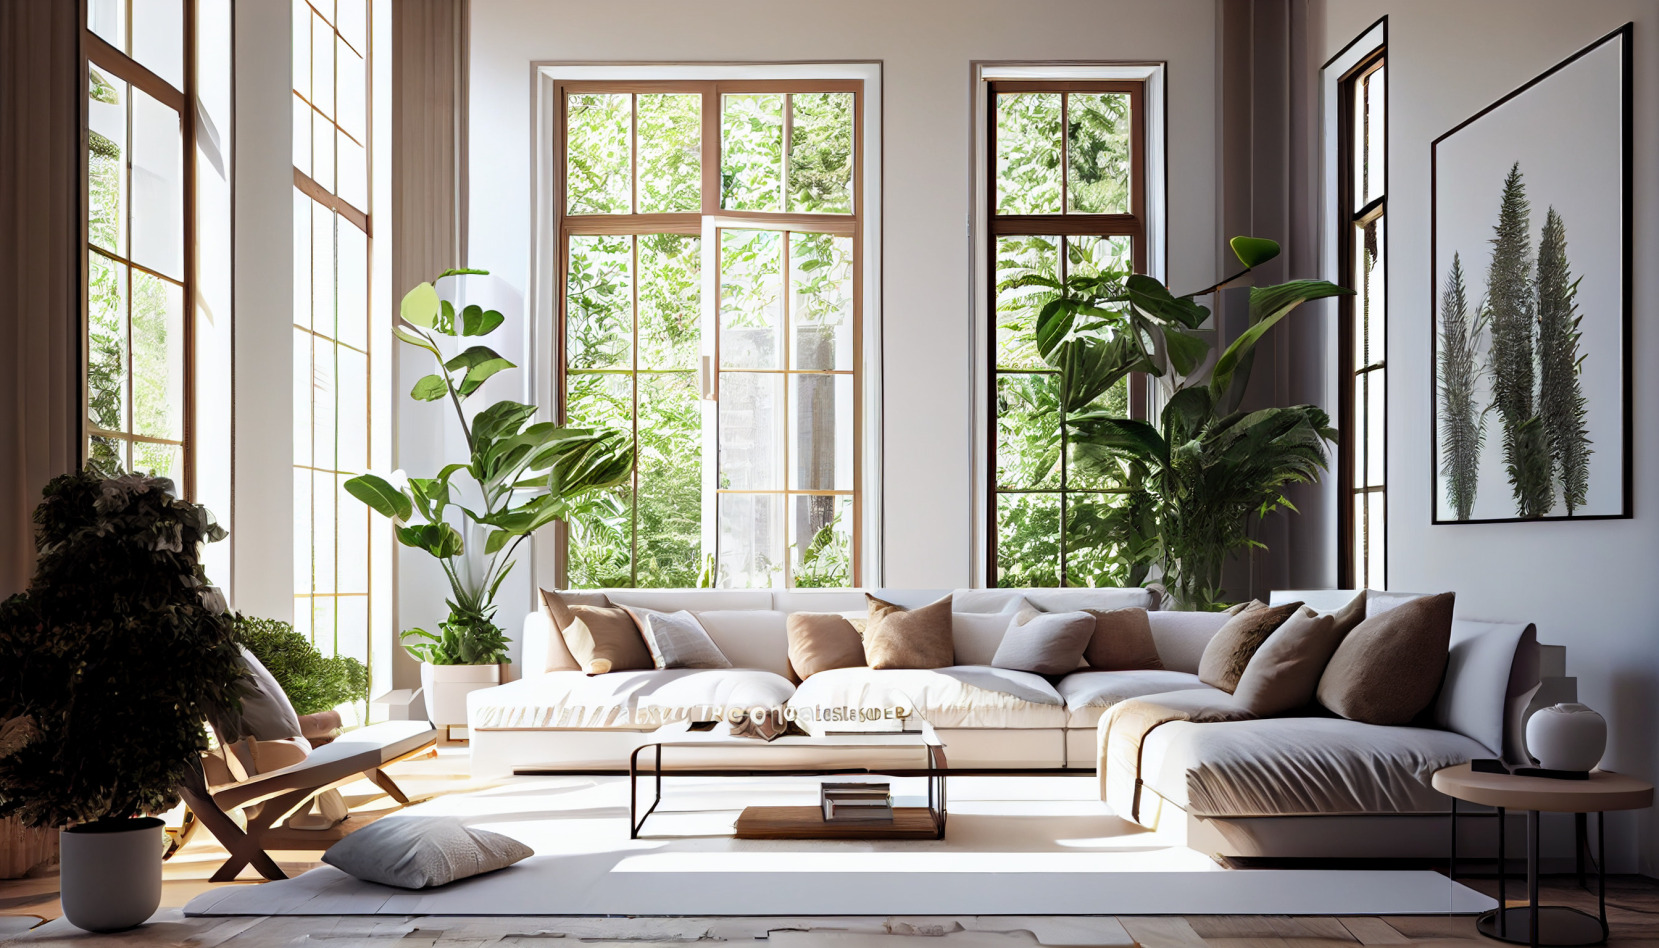 A bright contemporary living room with large windows, cream fabric couches, and tall plants.